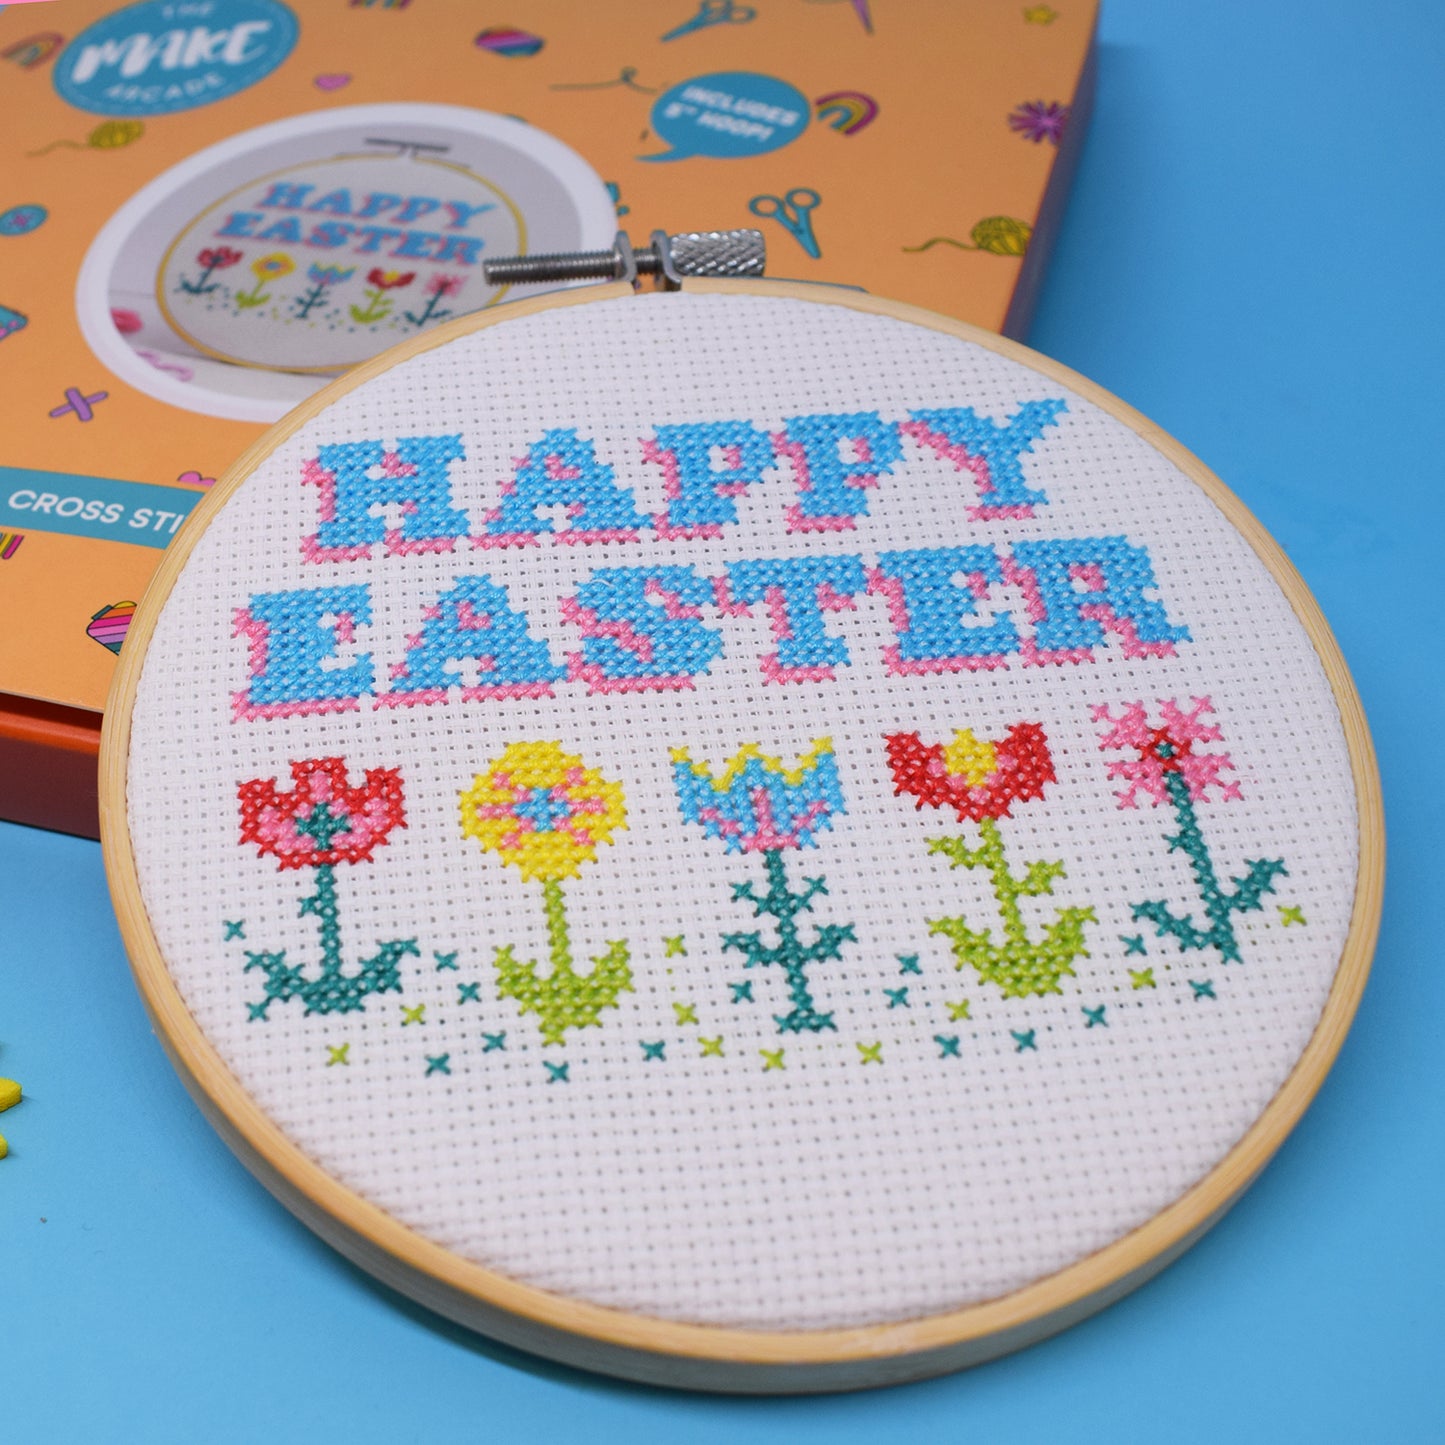 'HAPPY EASTER' Large 5" Cross Stitch Craft Kit